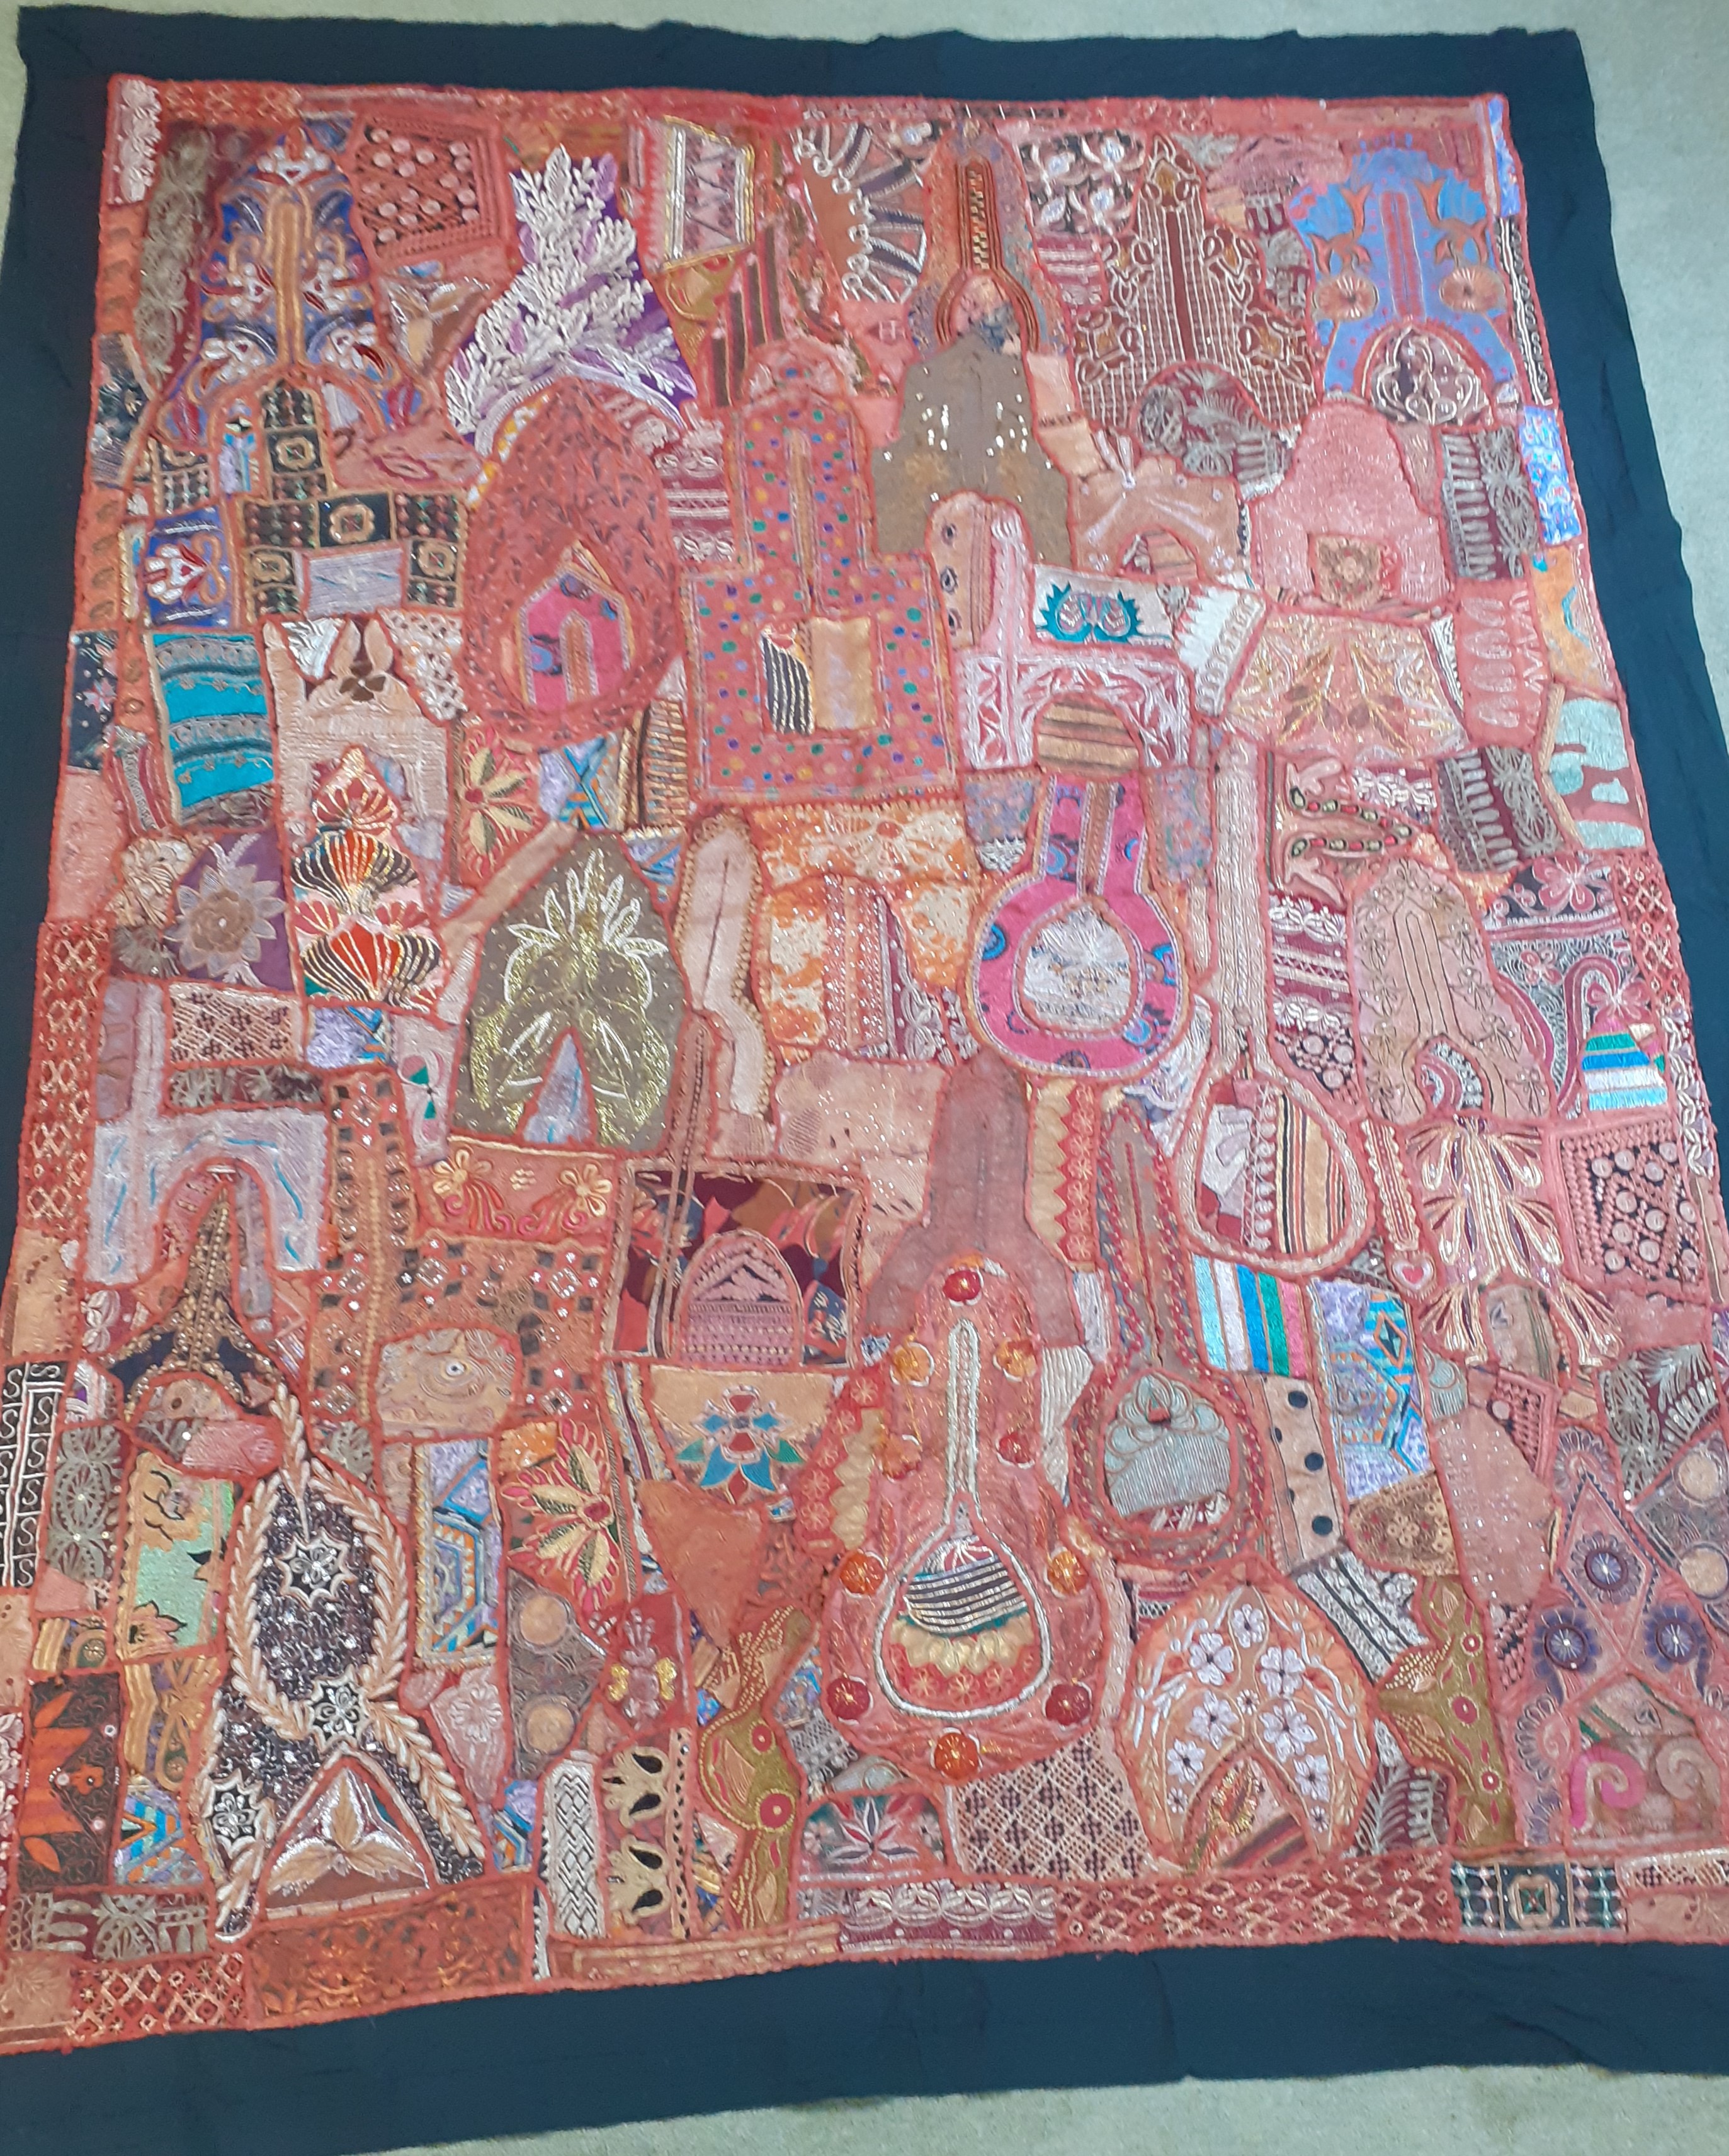 Large 20th century Indian patchwork bedspread / wall hanging / kantha throw, made up of hand made